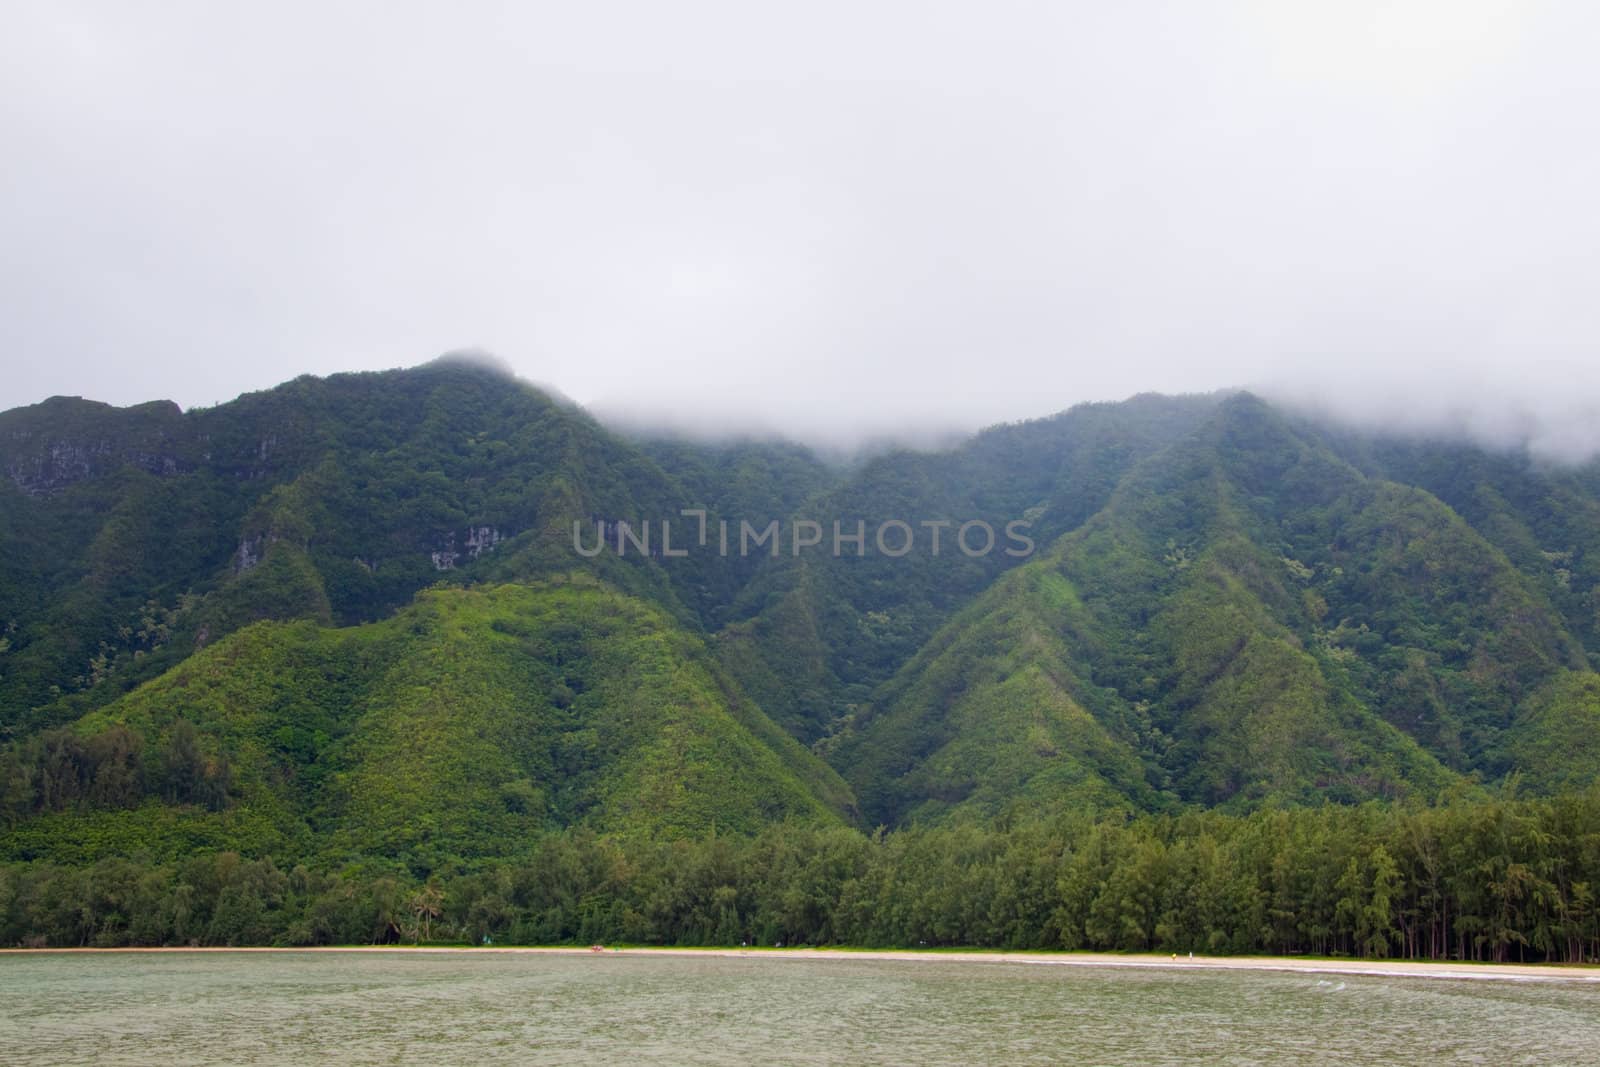 Lush vegetation covers some mountains in oahu hawaii.